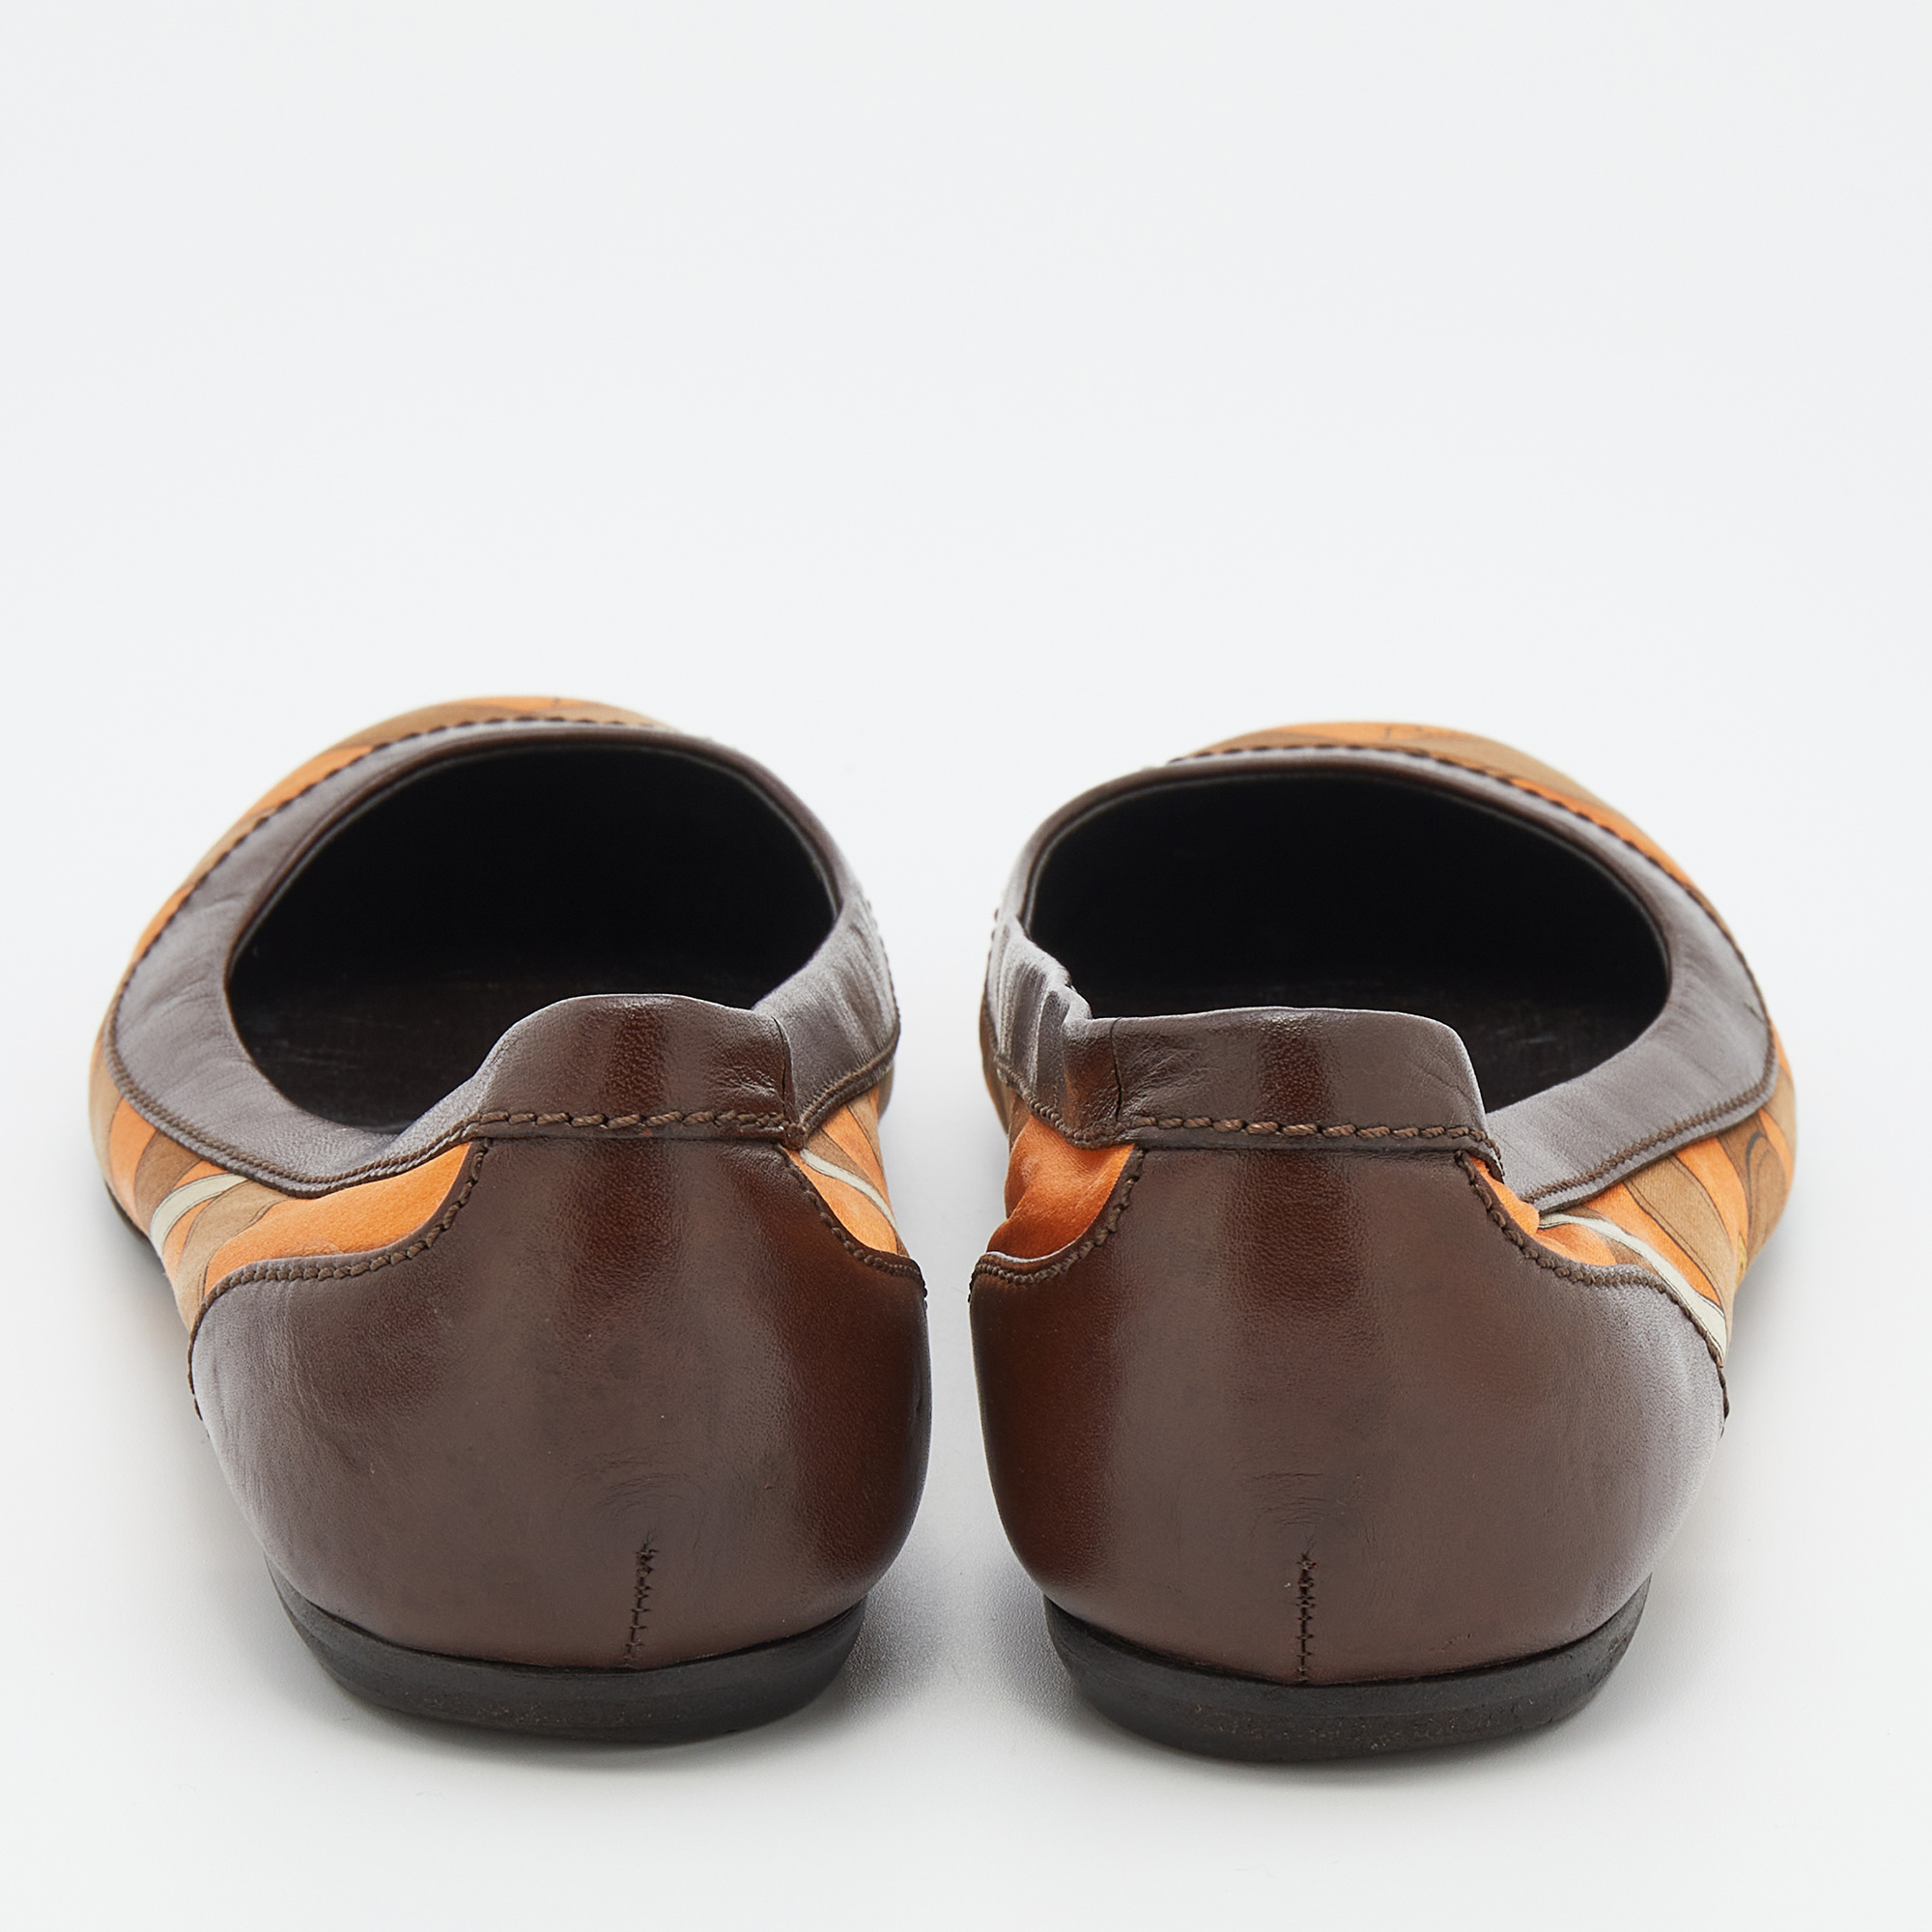 Burberry Brown/Orange Leather And Satin Ballet Flats Size 36